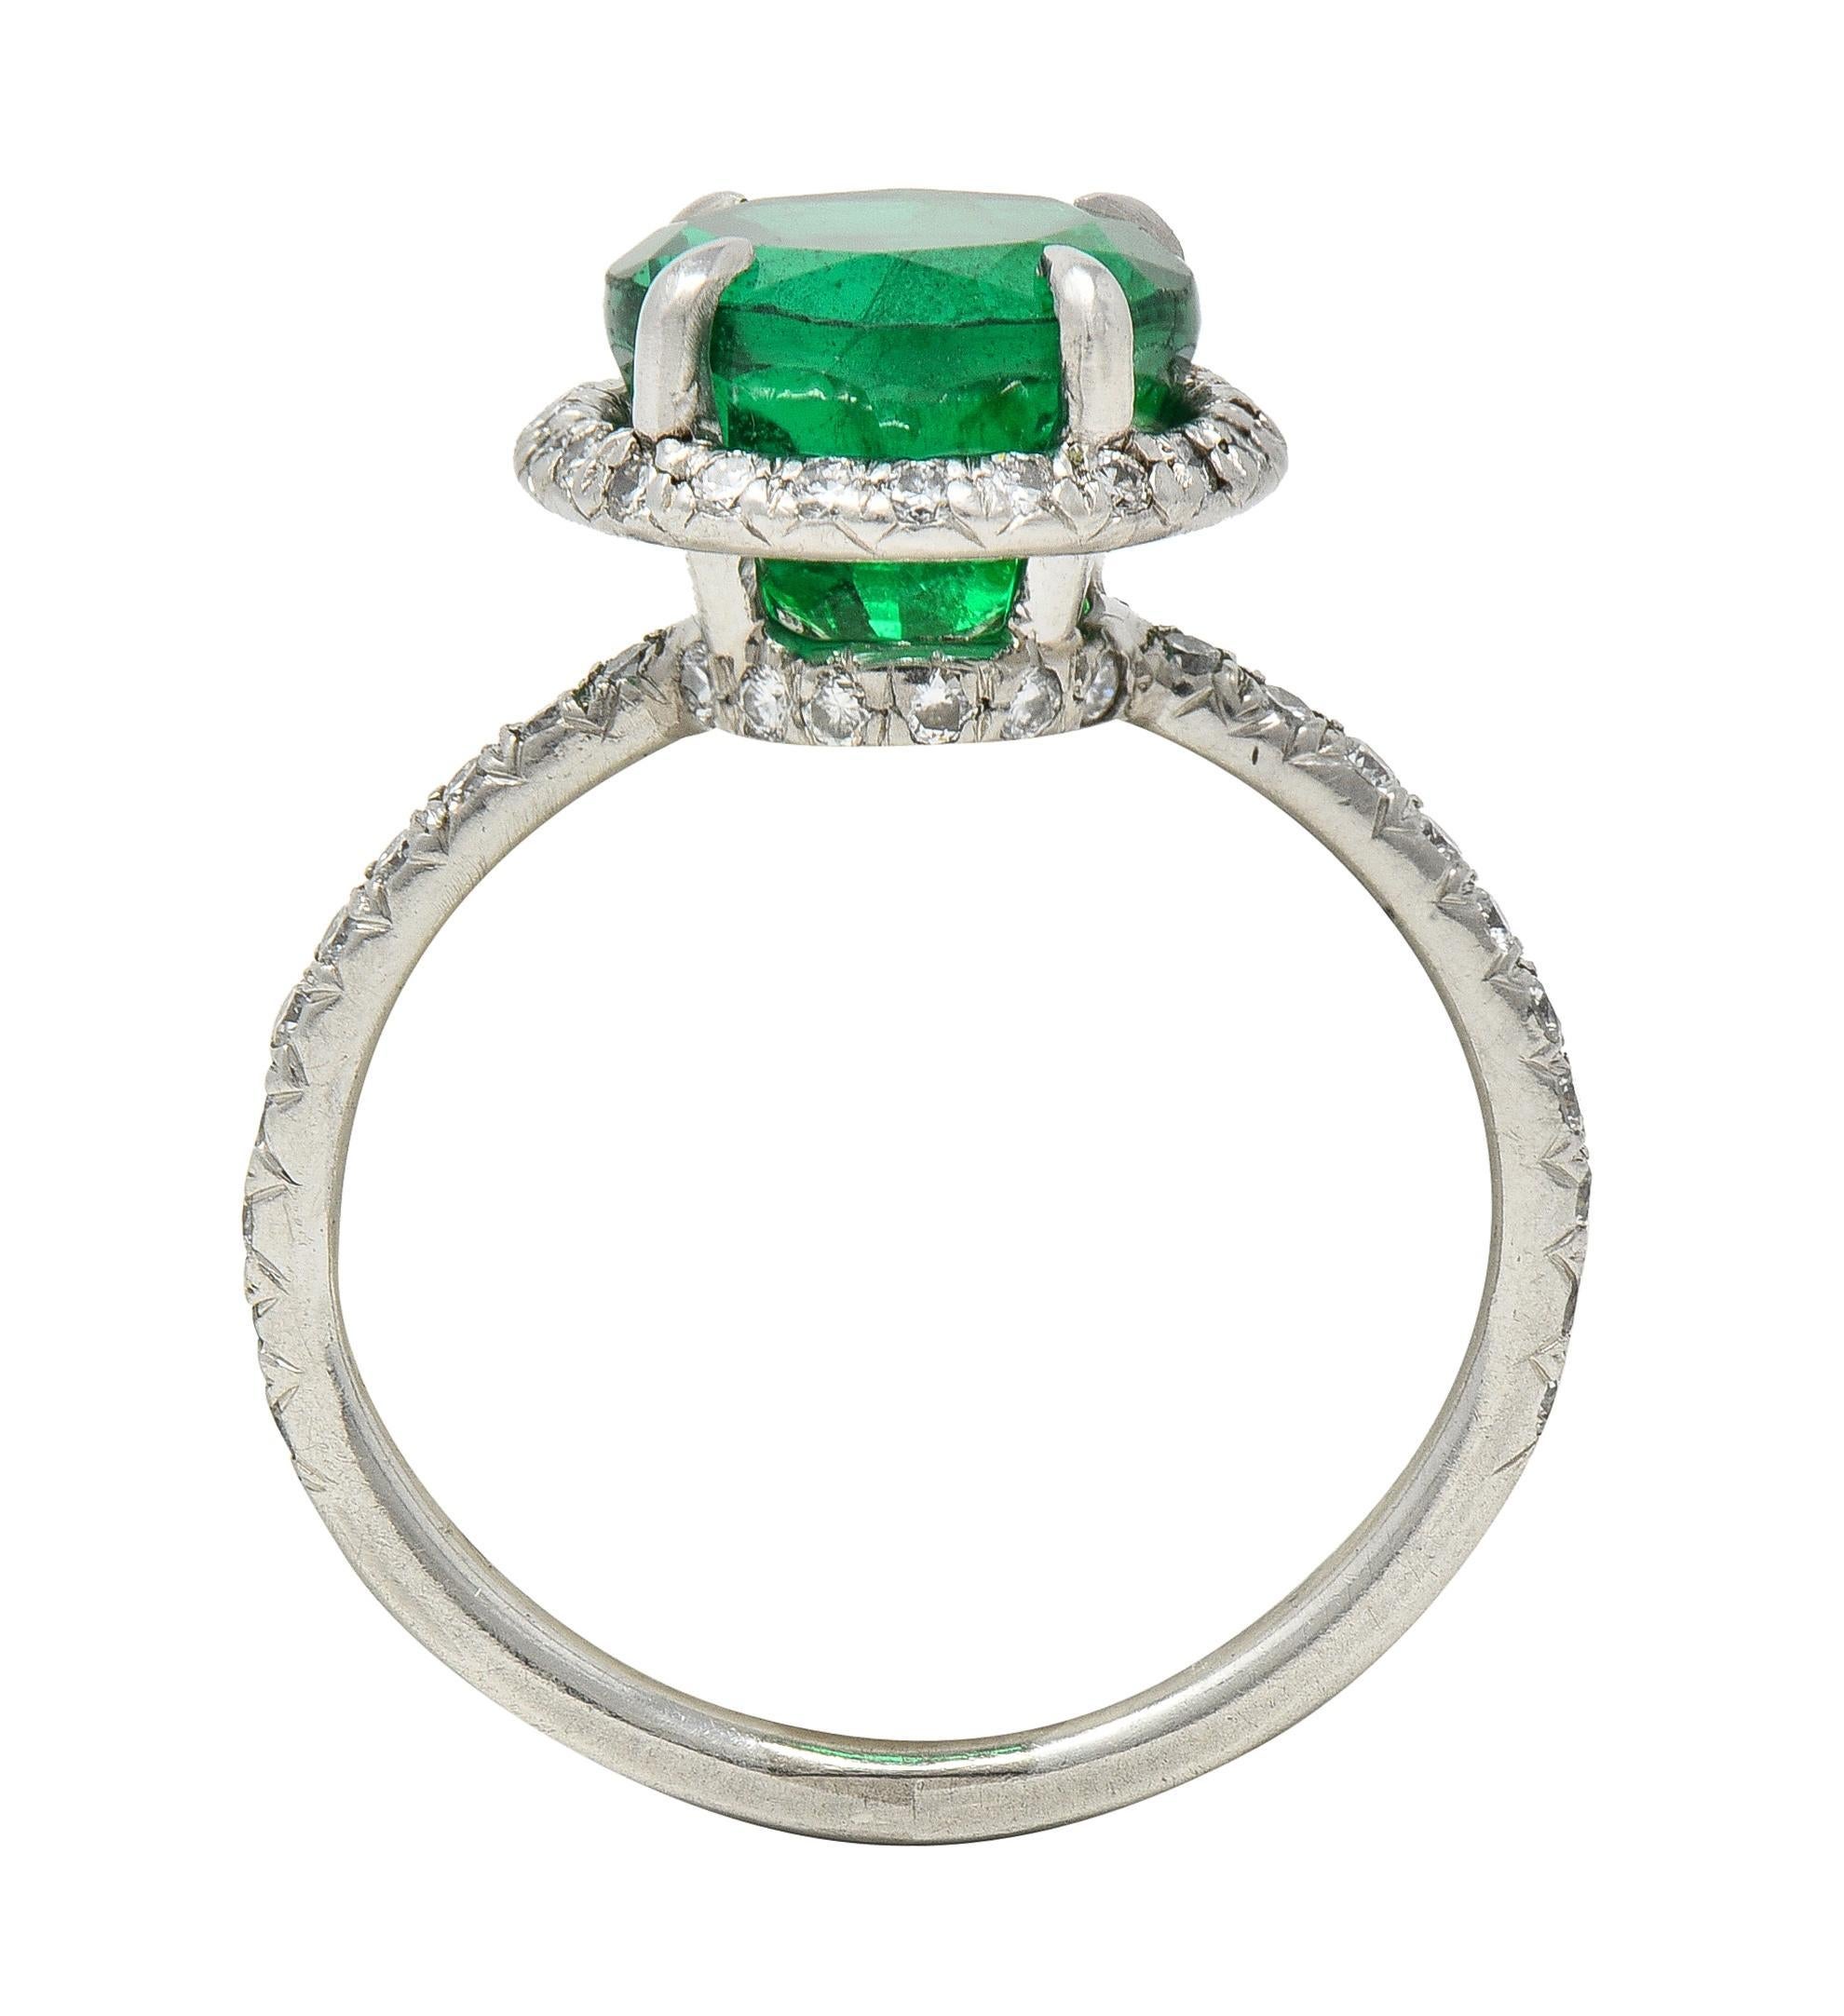 Centering a round cut emerald weighing 2.83 carats - transparent medium green
Natural Zambian in origin with minor traditional clarity enhancement - F2
Prong set in basket with a recessed round brilliant cut diamond halo surround
With additional